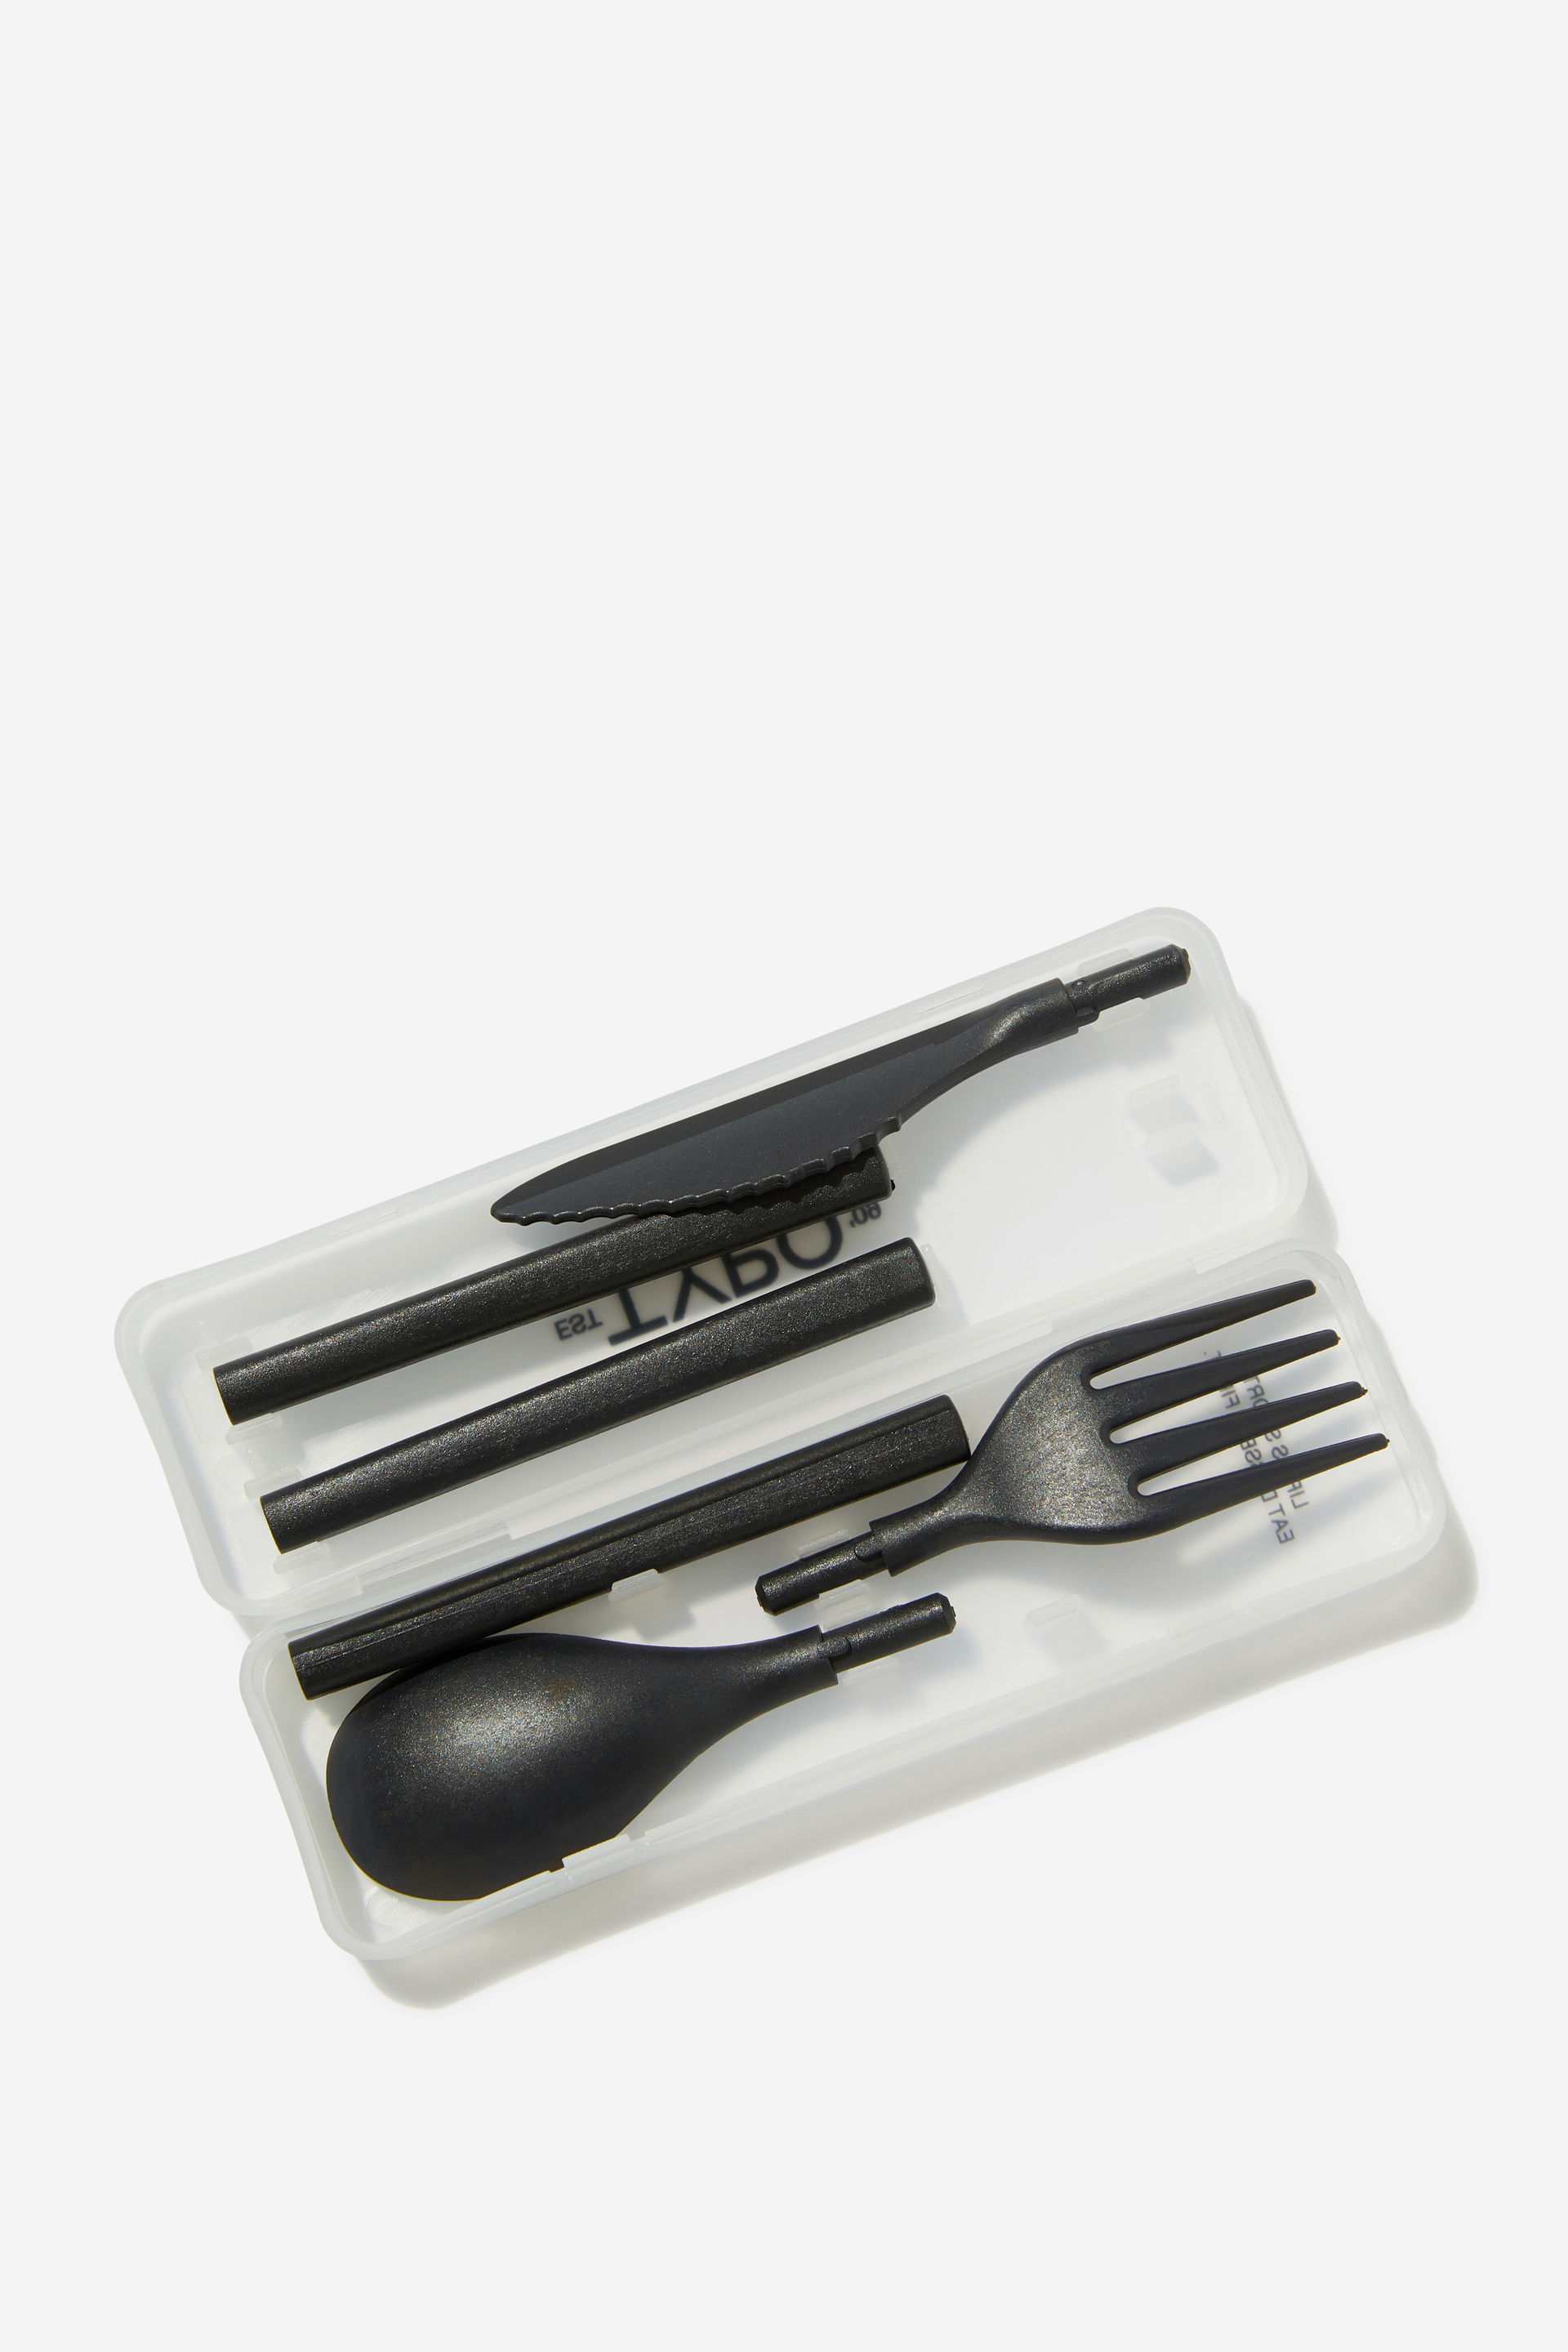 Typo reusable cutlery set in lilac